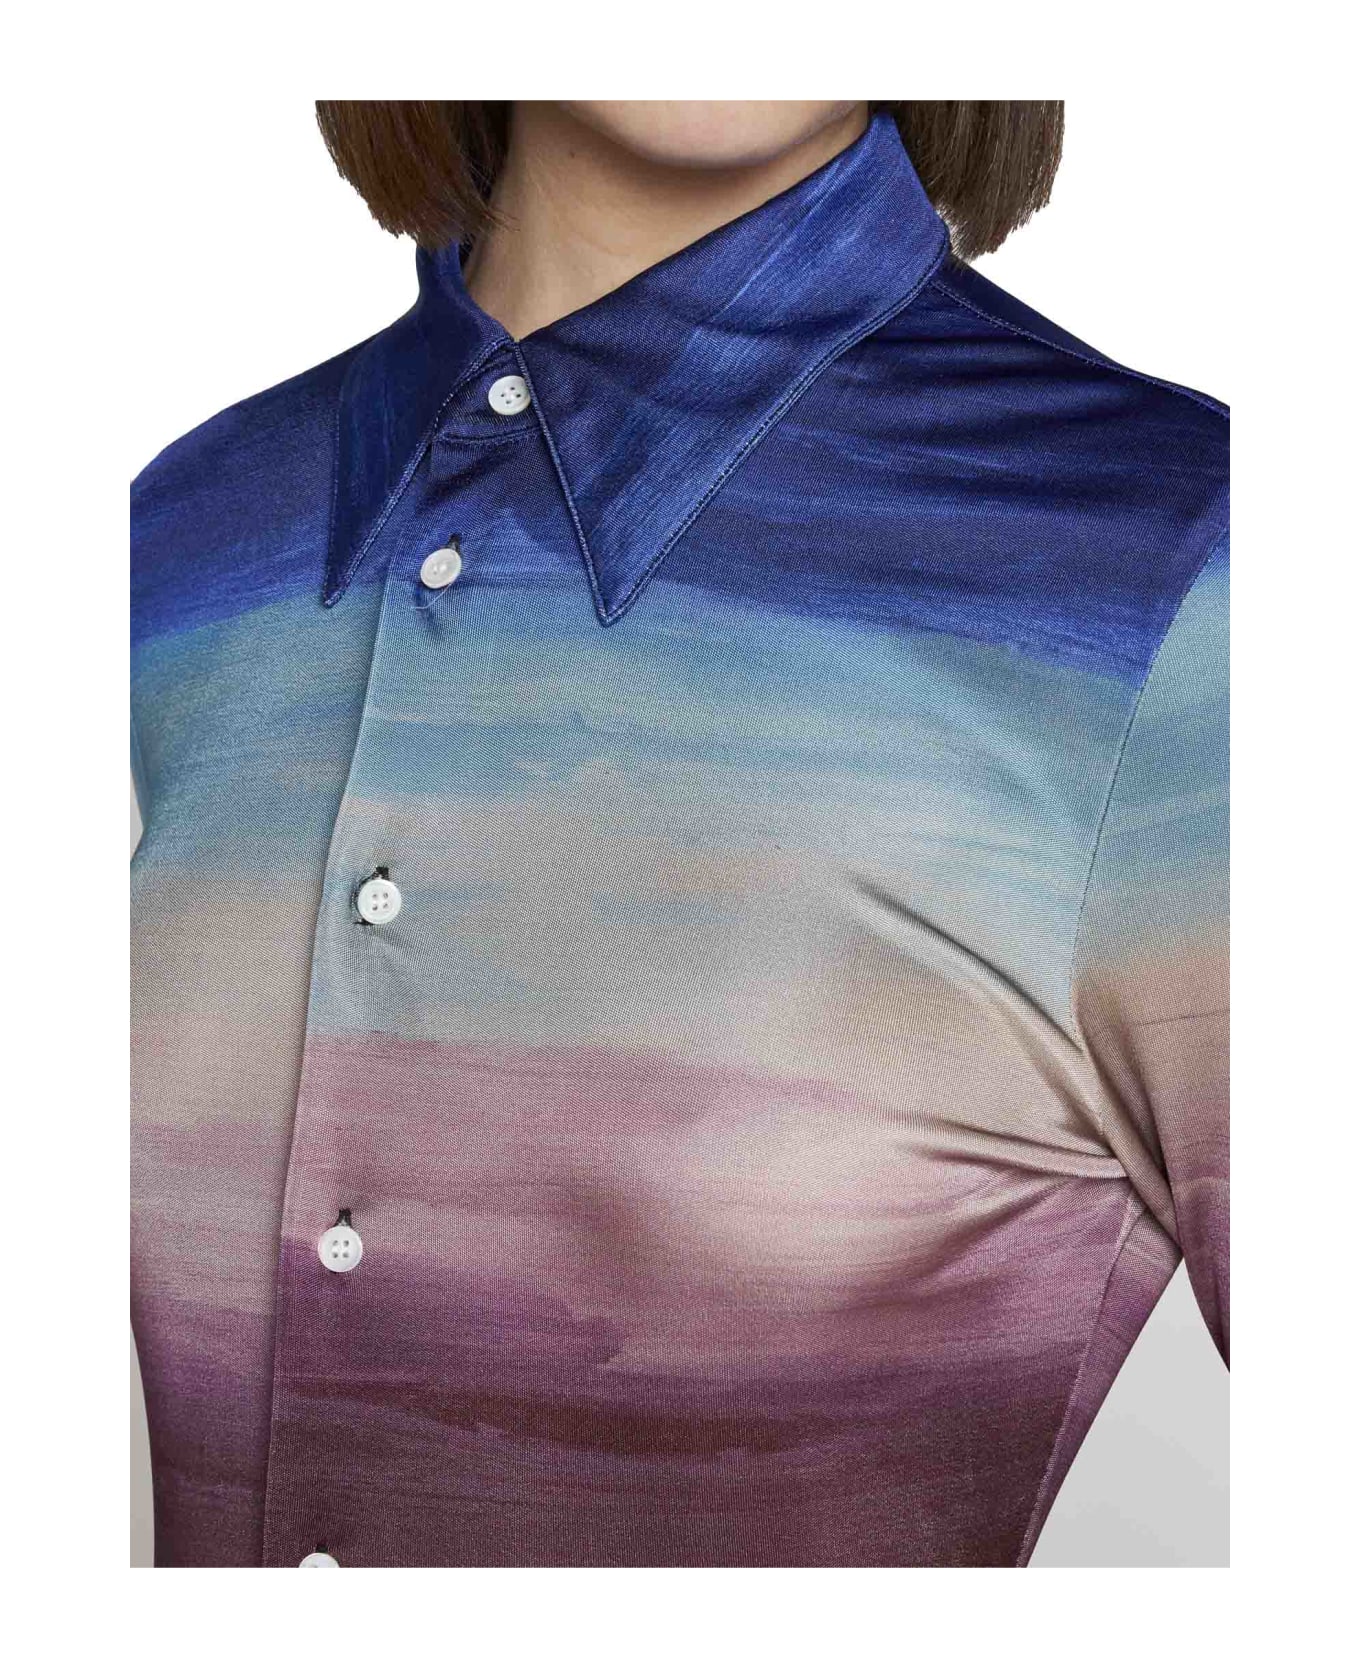 Marni Multicoloured Jersey Shirt With Dark Side Of The Moon Print - MULTICOLORE